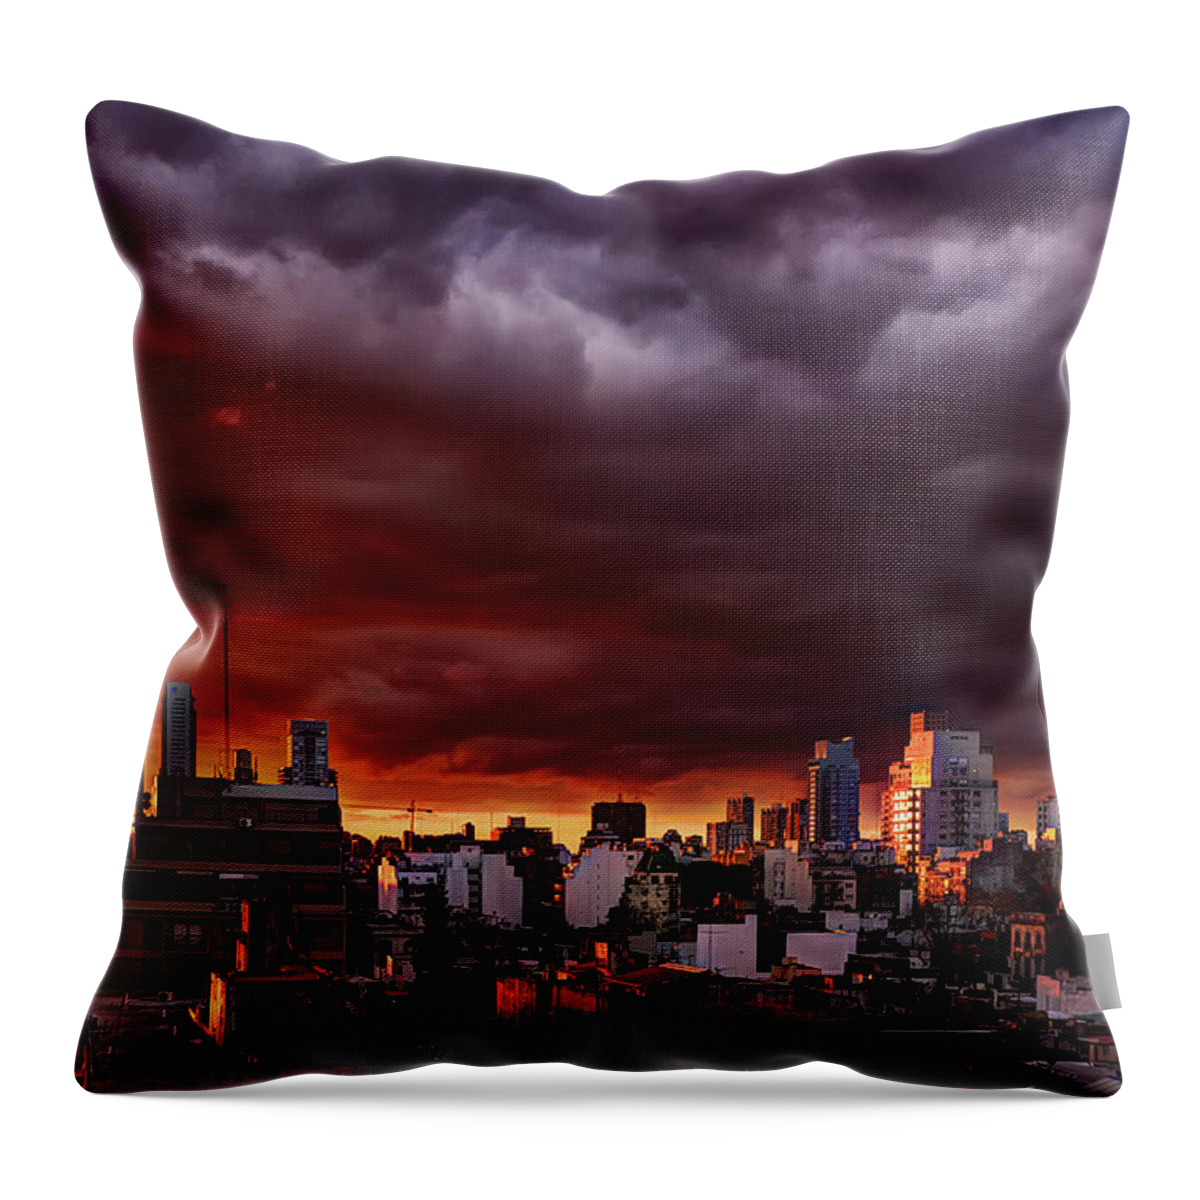 Tranquility Throw Pillow featuring the photograph La Luz Del Ocaso - The Light Of The by Celta4